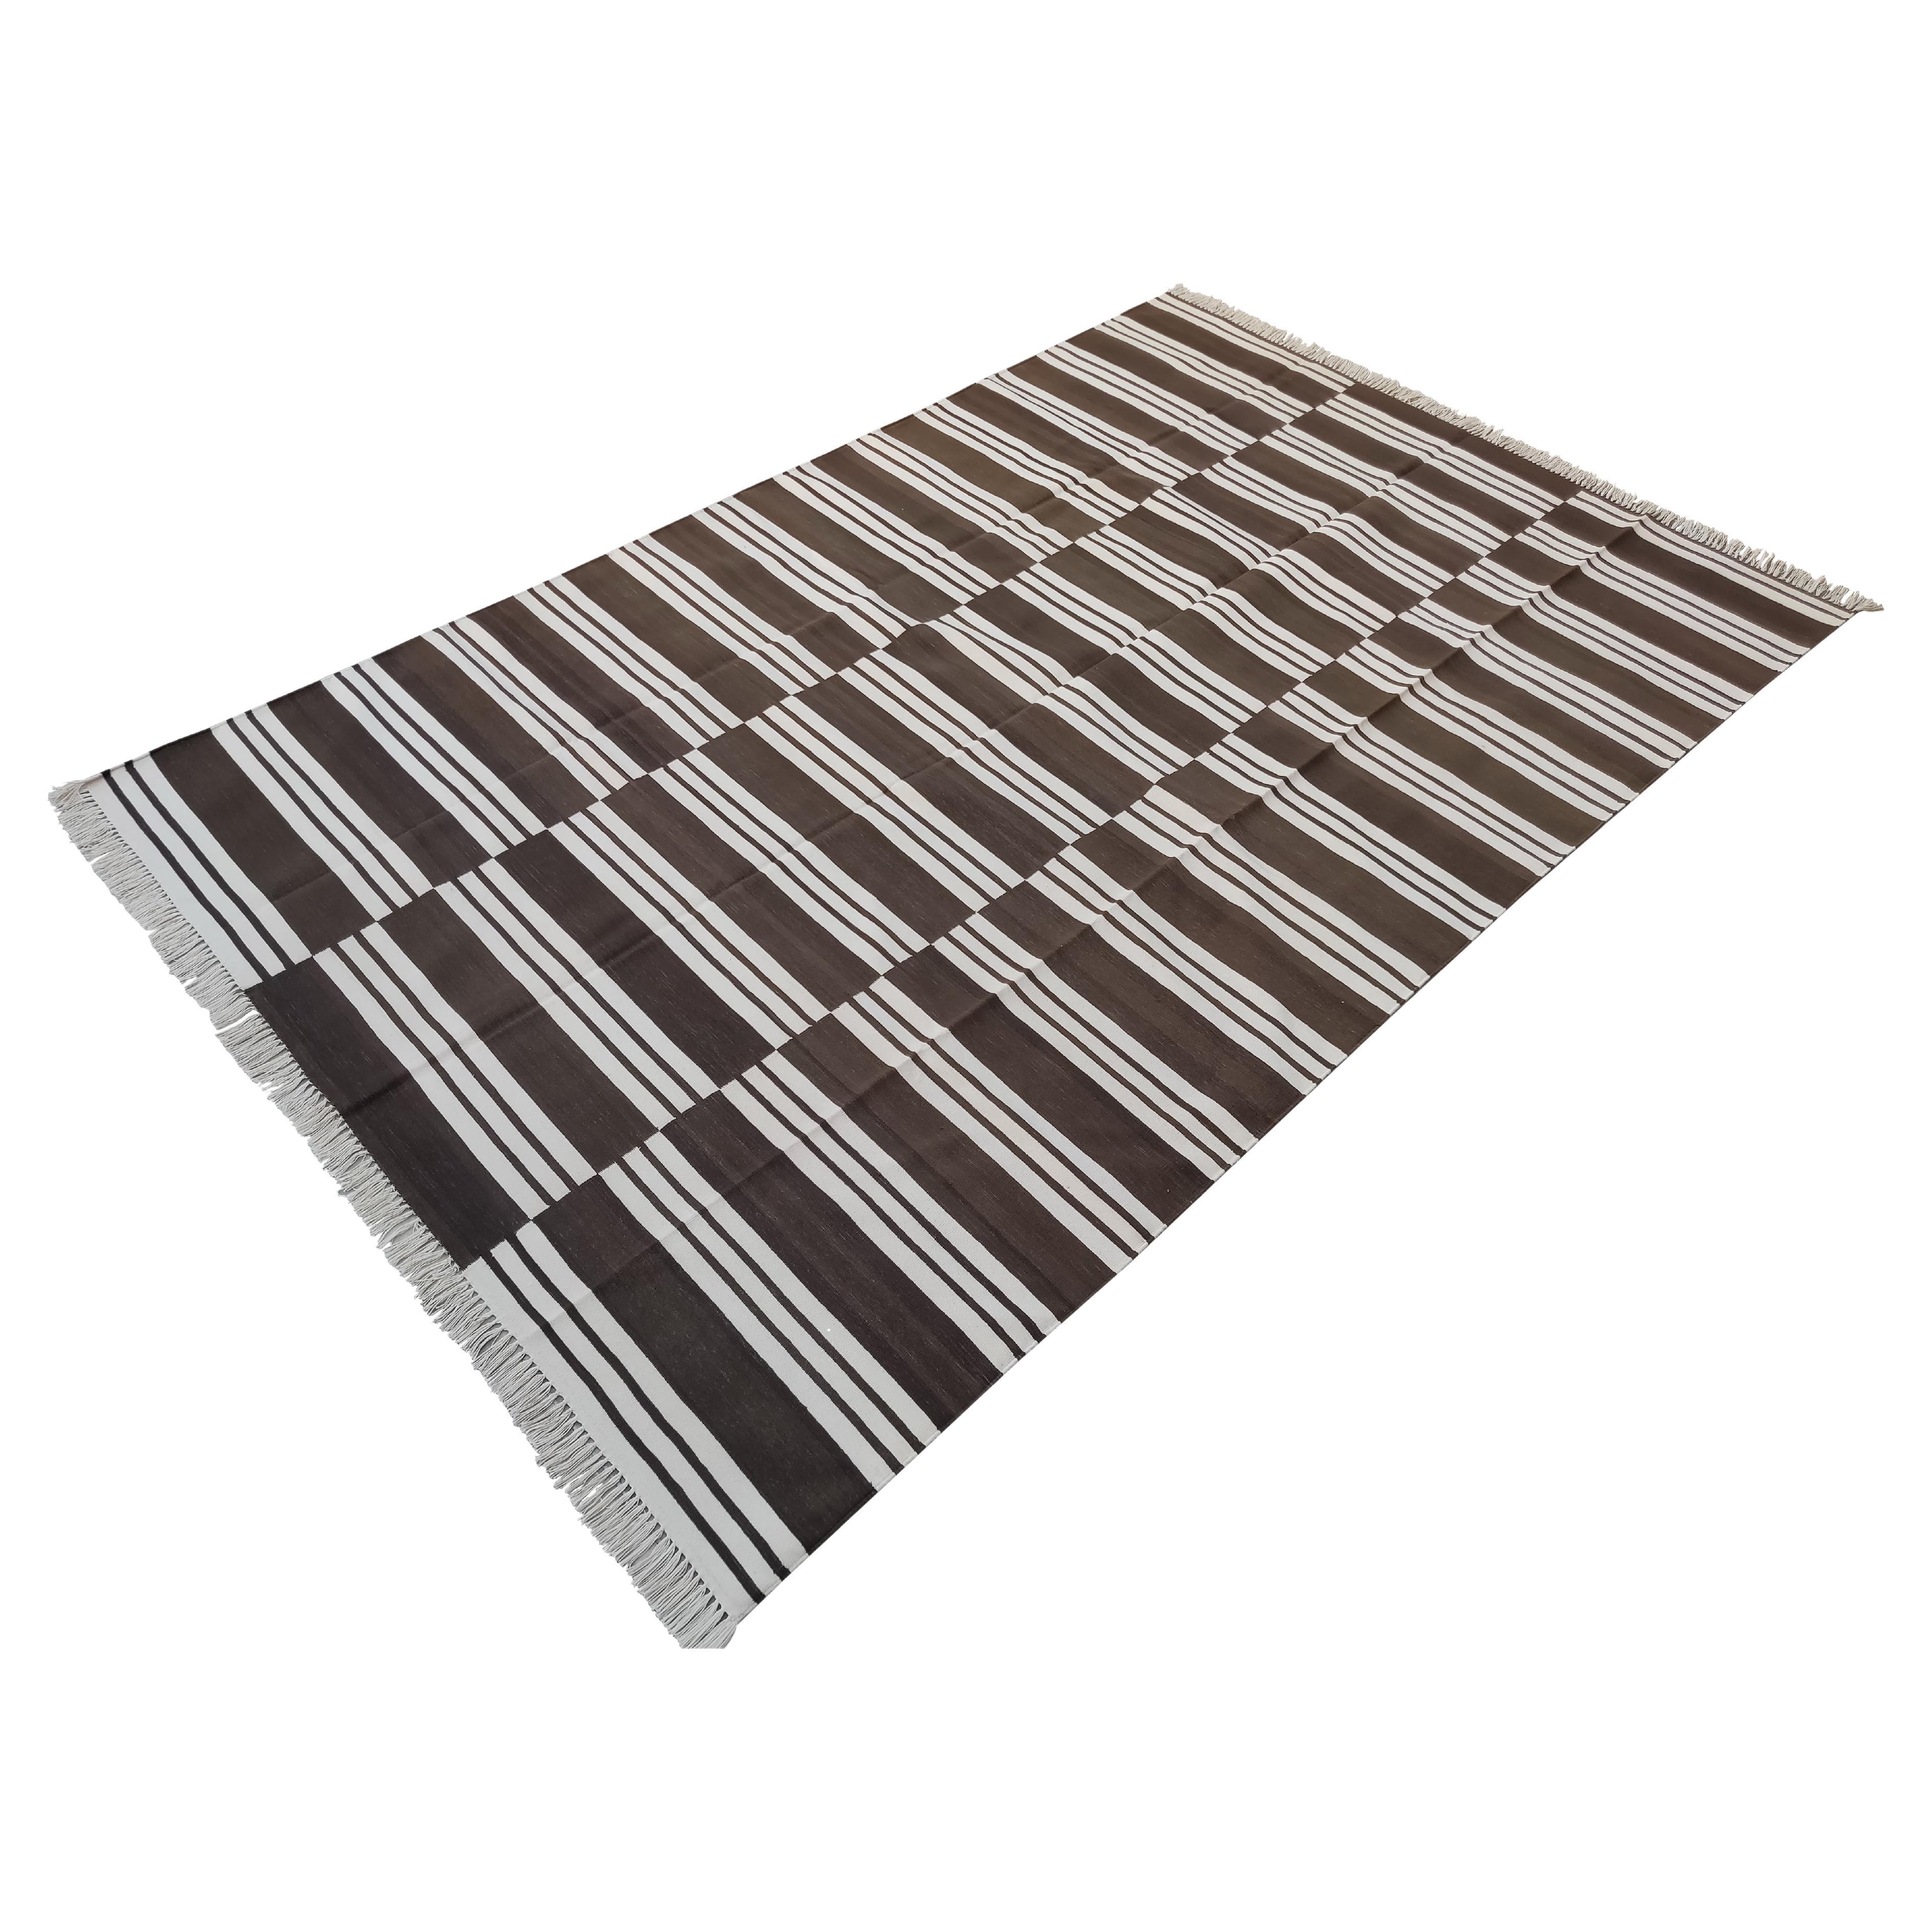 Handmade Cotton Area Flat Weave Rug, 6x9 Brown And White Striped Indian Dhurrie For Sale